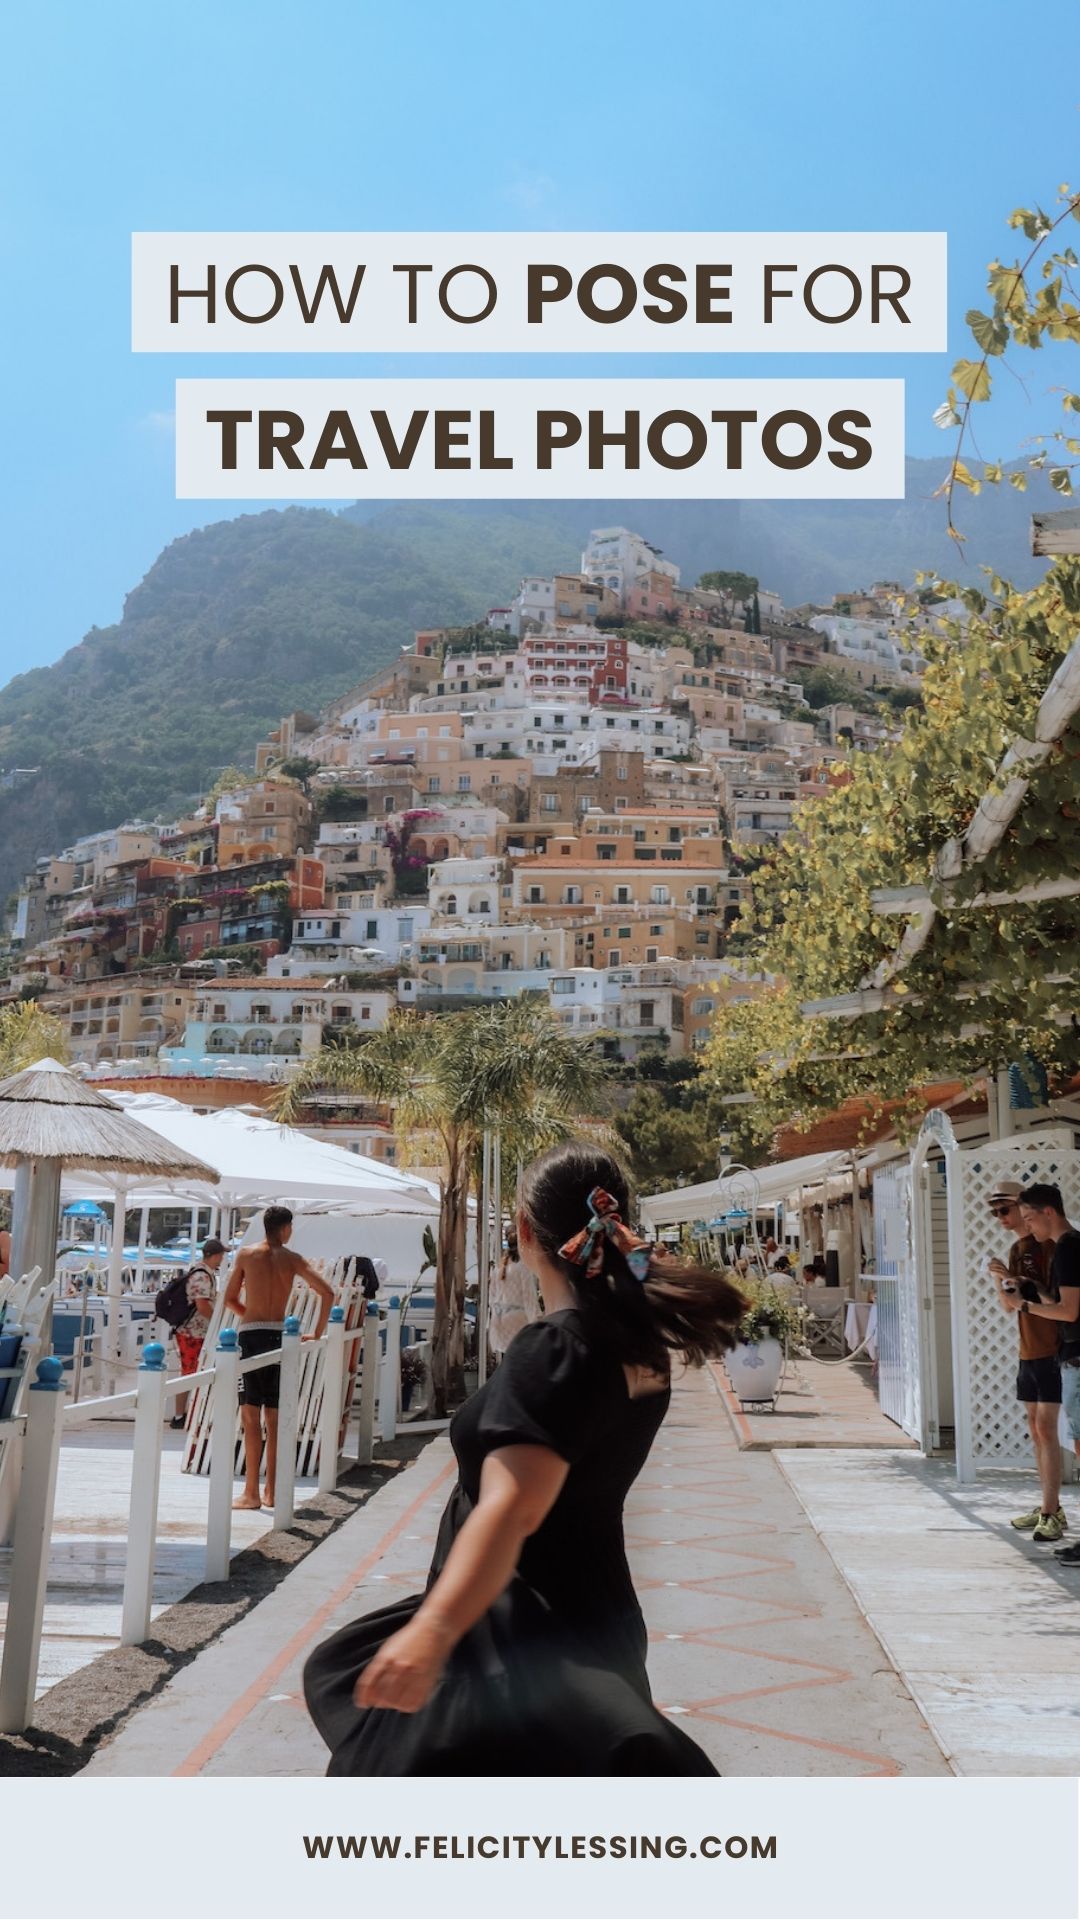 Top 10 Travel Photoshoot Tips With Outfit Ideas & Poses | Flytographer